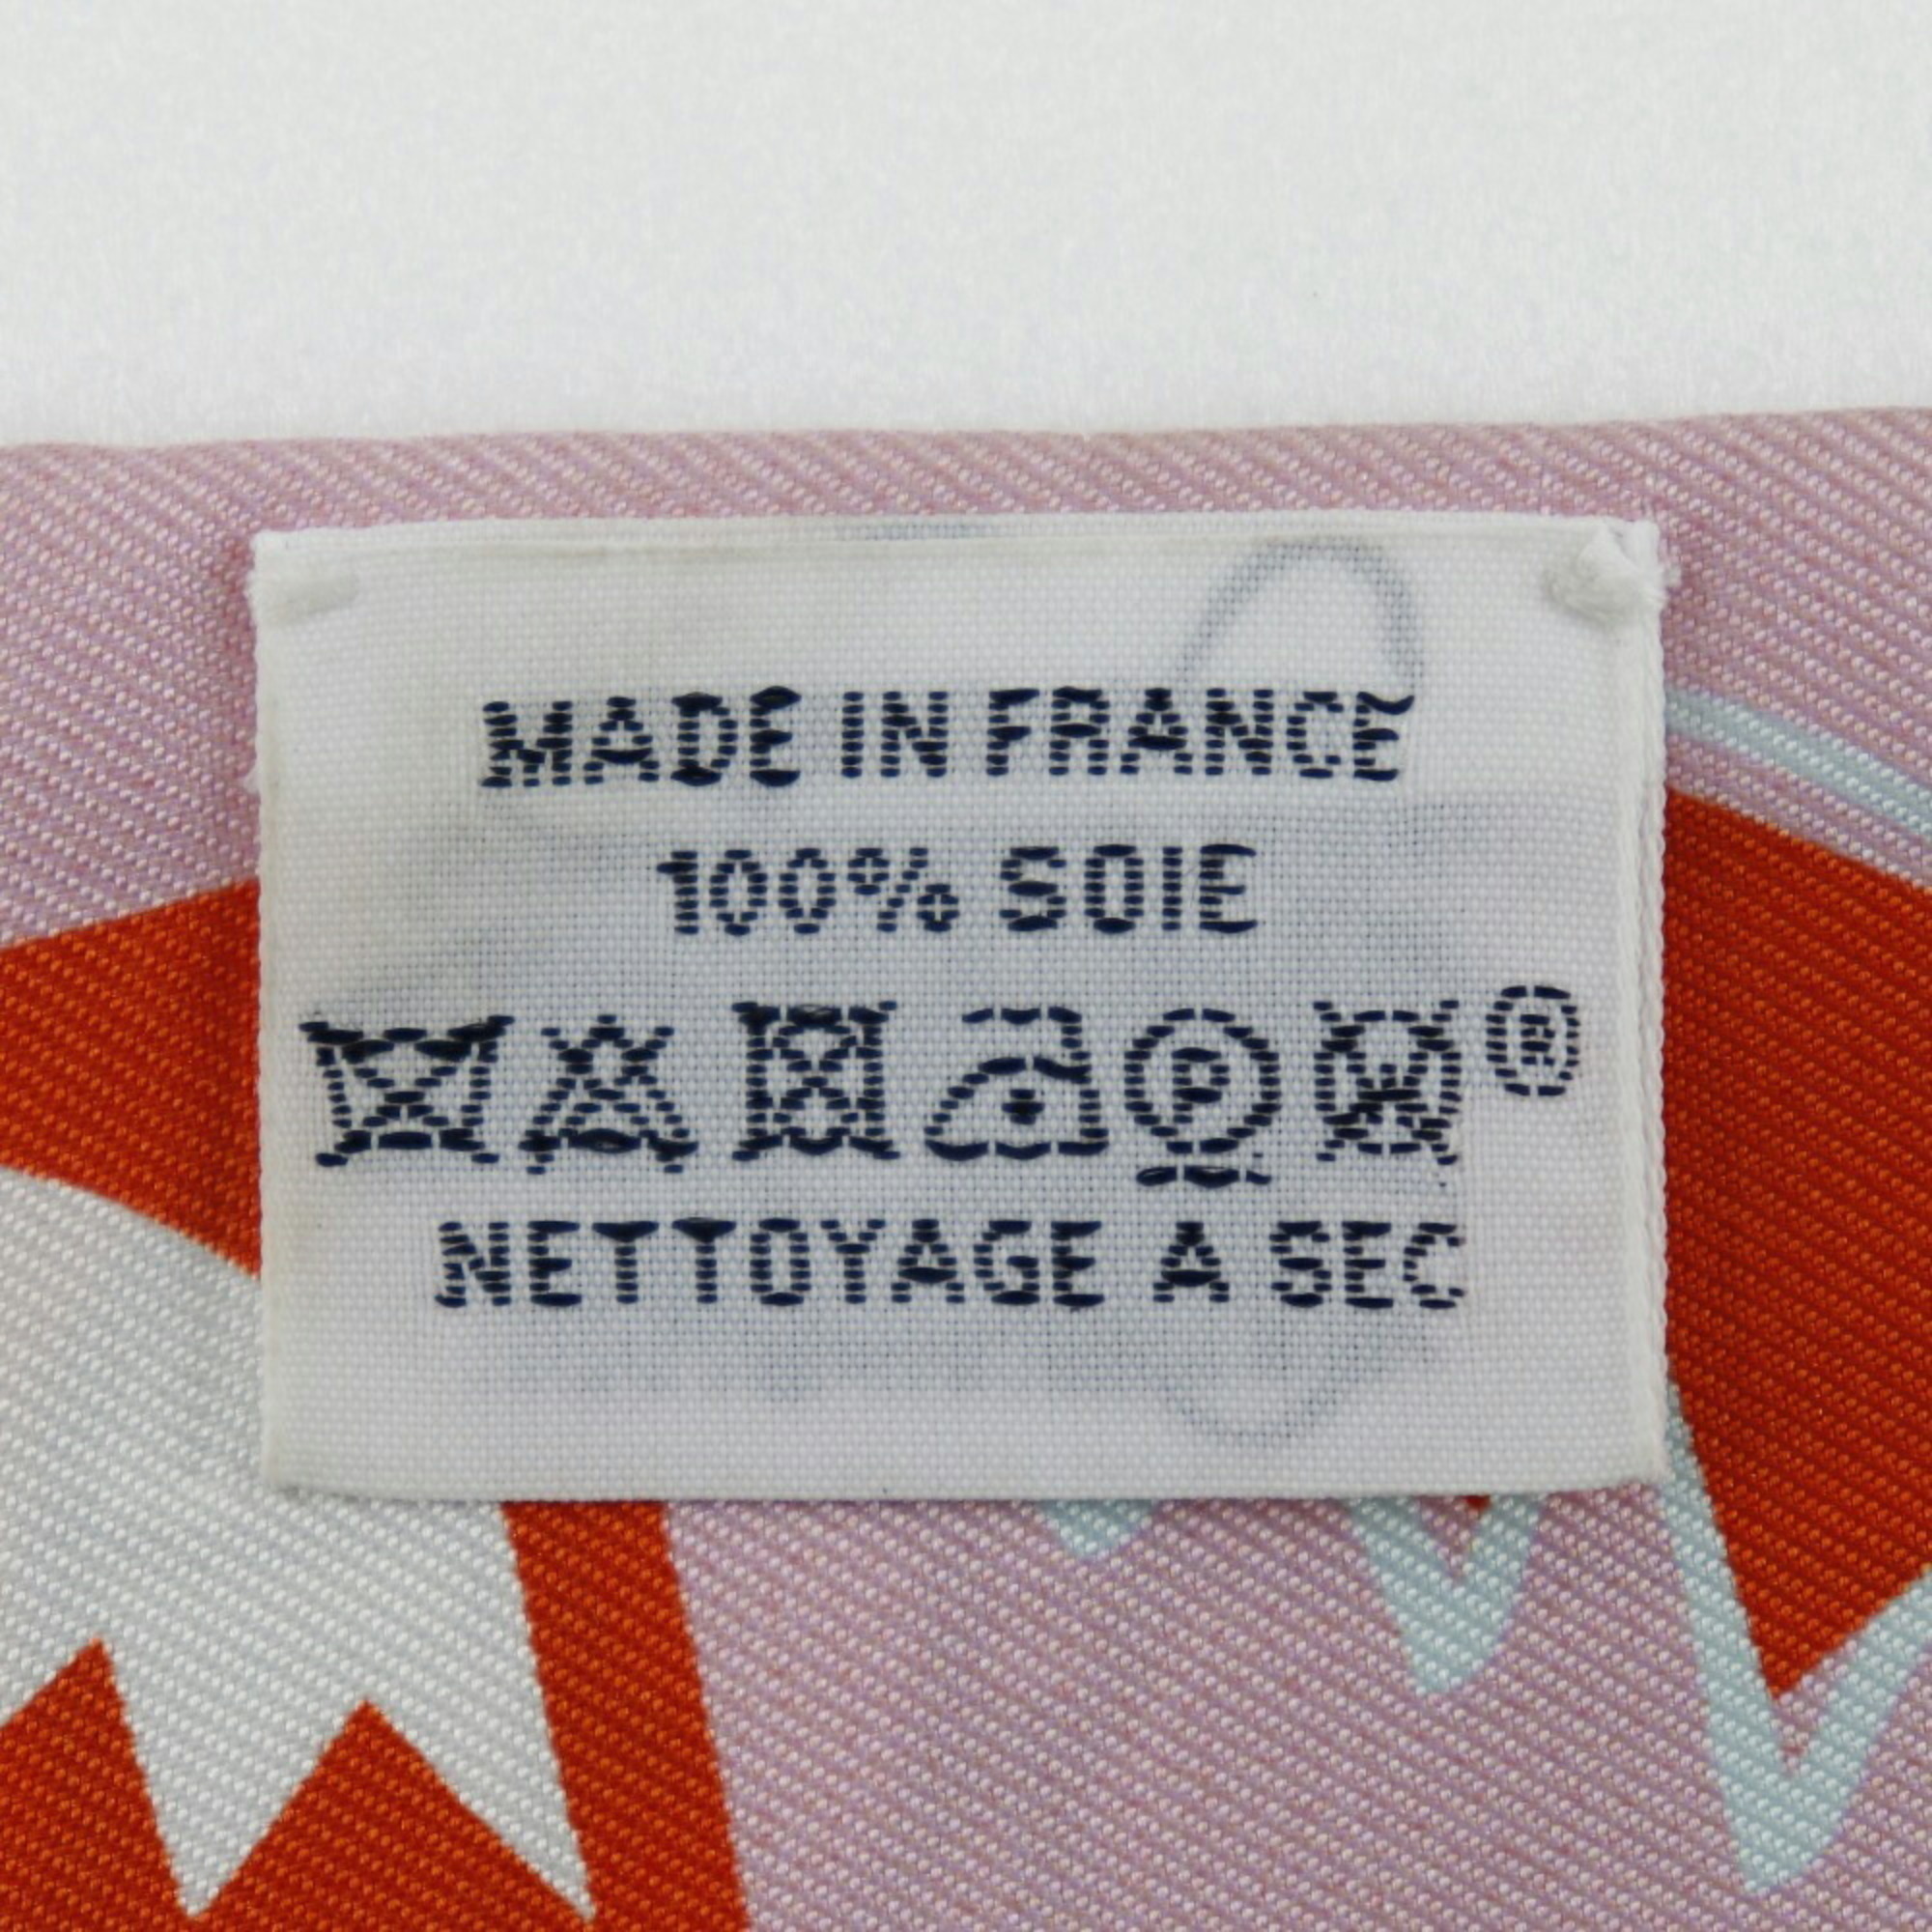 HERMES Hermes Twilly Scarf Sea Surf and Fun Fin Silk Pink Ladies